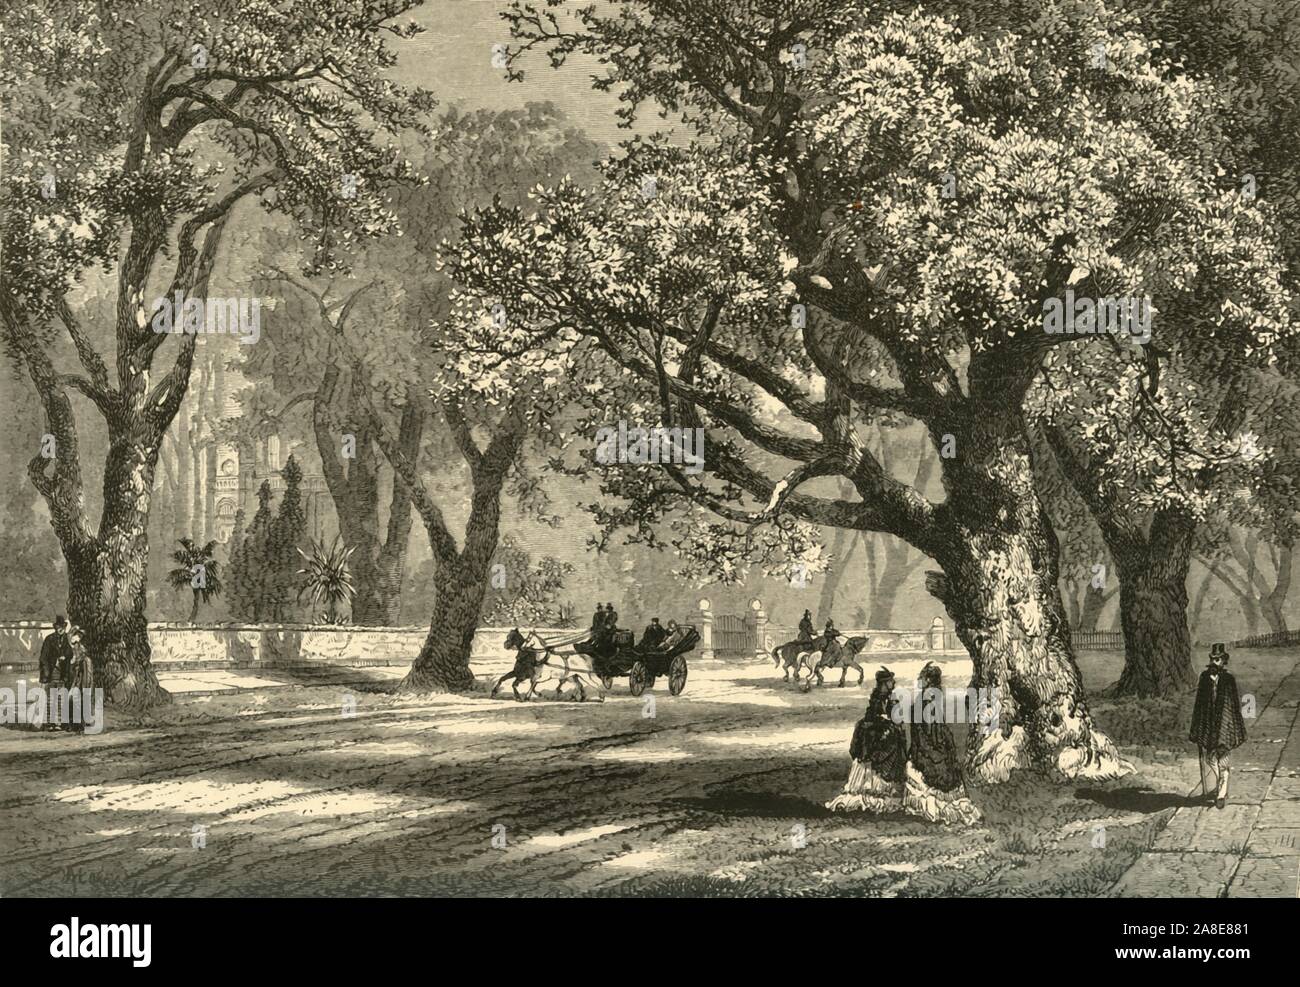 'Oaks of Oakland', 1874. Oak trees lining a wide boulevard in Oakland, California, USA. From &quot;Picturesque America; or, The Land We Live In, A Delineation by Pen and Pencil of the Mountains, Rivers, Lakes...with Illustrations on Steel and Wood by Eminent American Artists&quot; Vol. II, edited by William Cullen Bryant. [D. Appleton and Company, New York, 1874] Stock Photo